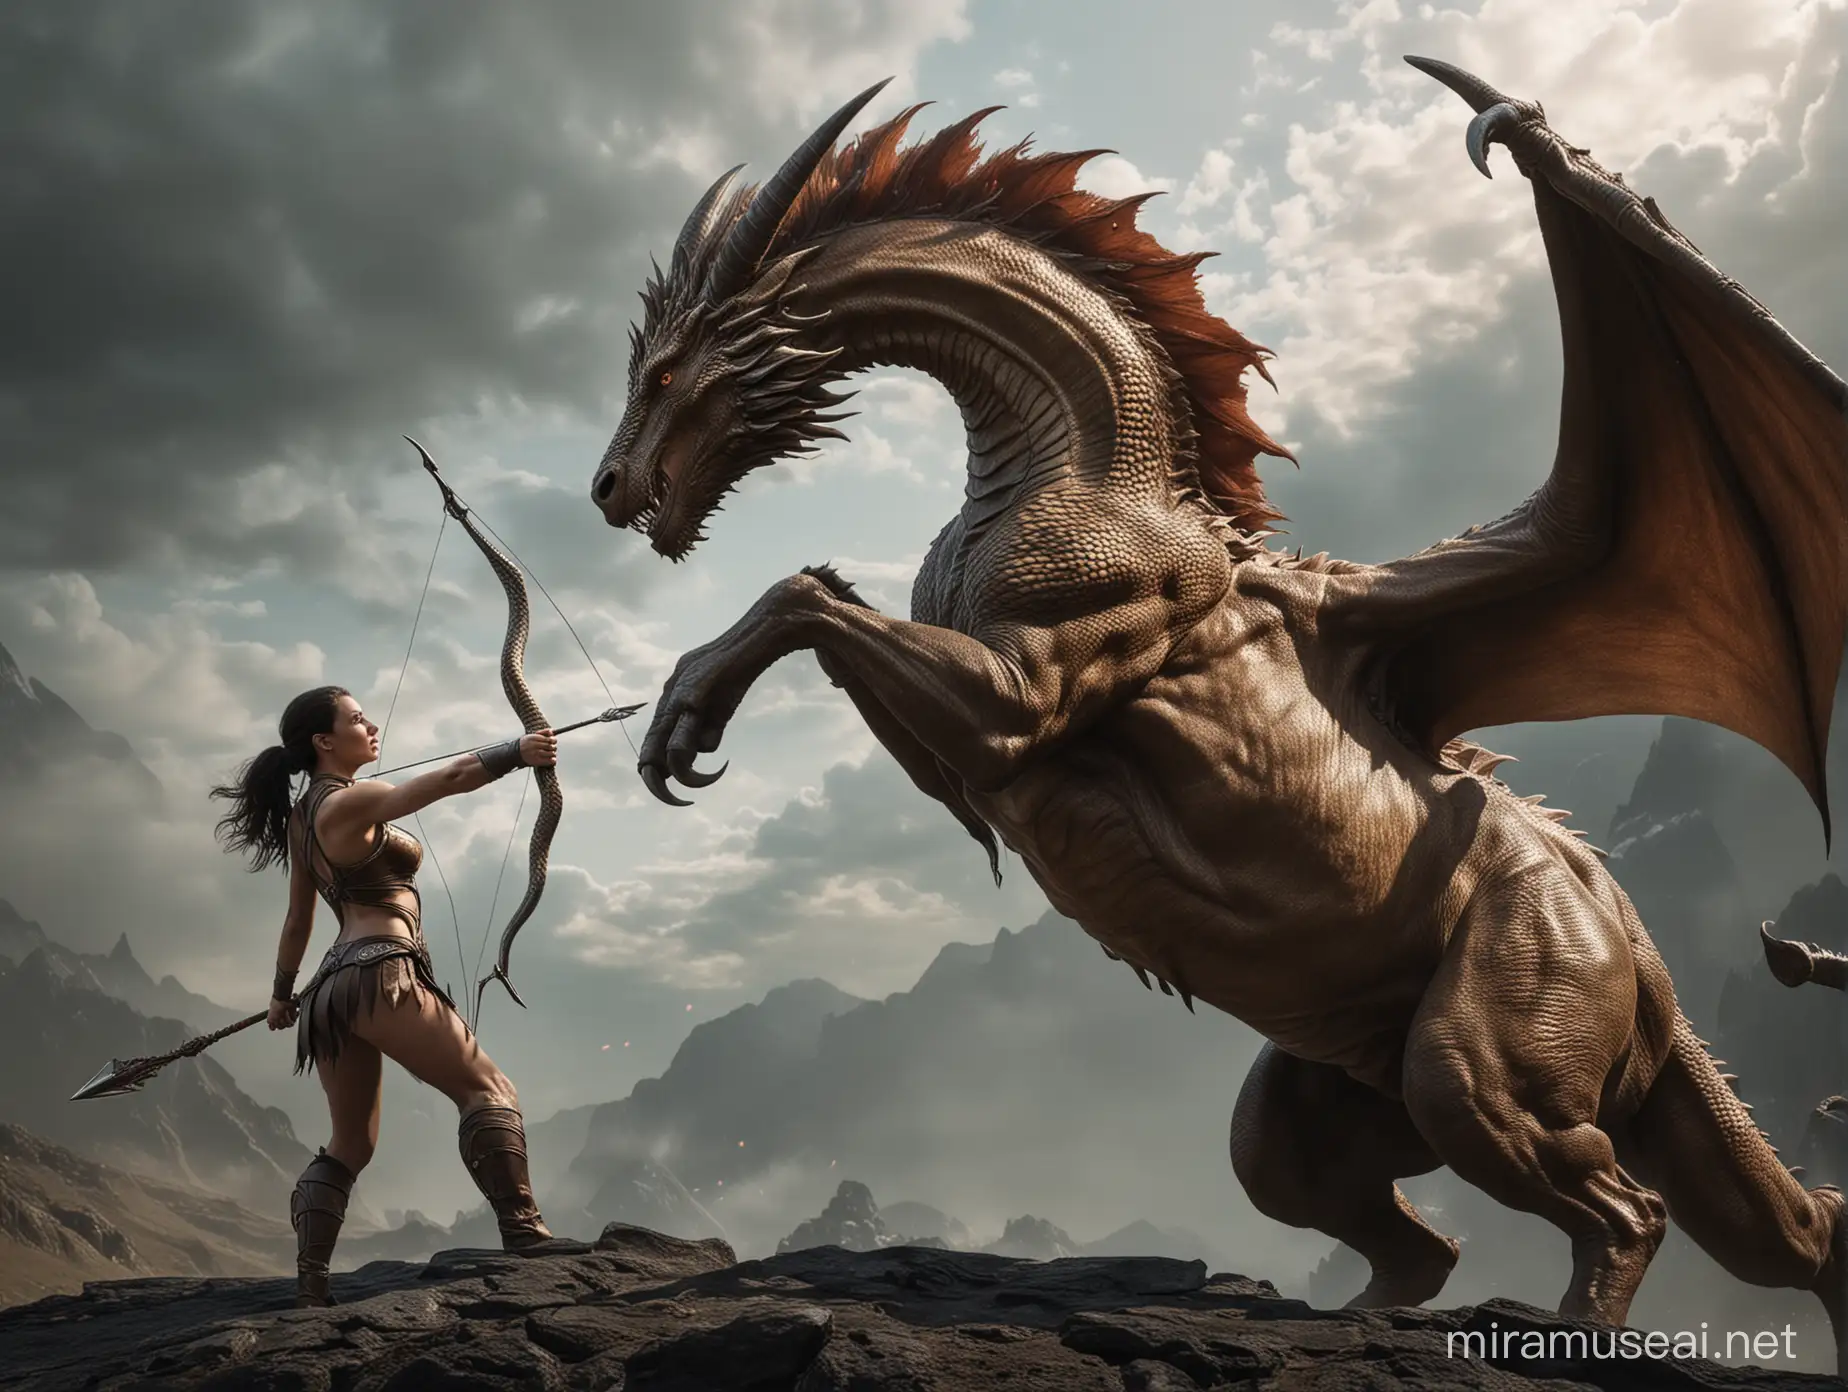 Create a photorealistic image that shows a mythical creature with the body of a centaur and the head of a dragon. This creature should be depicted in an epic moment when it pulls its bow to release a fiery arrow. To achieve the effect of superrealism, the image must be carefully processed using cinematic post-production techniques. The end result should create the illusion that the photo was taken through the lens of a Nikon D850 camera, capturing the myth in a moment of greatness.